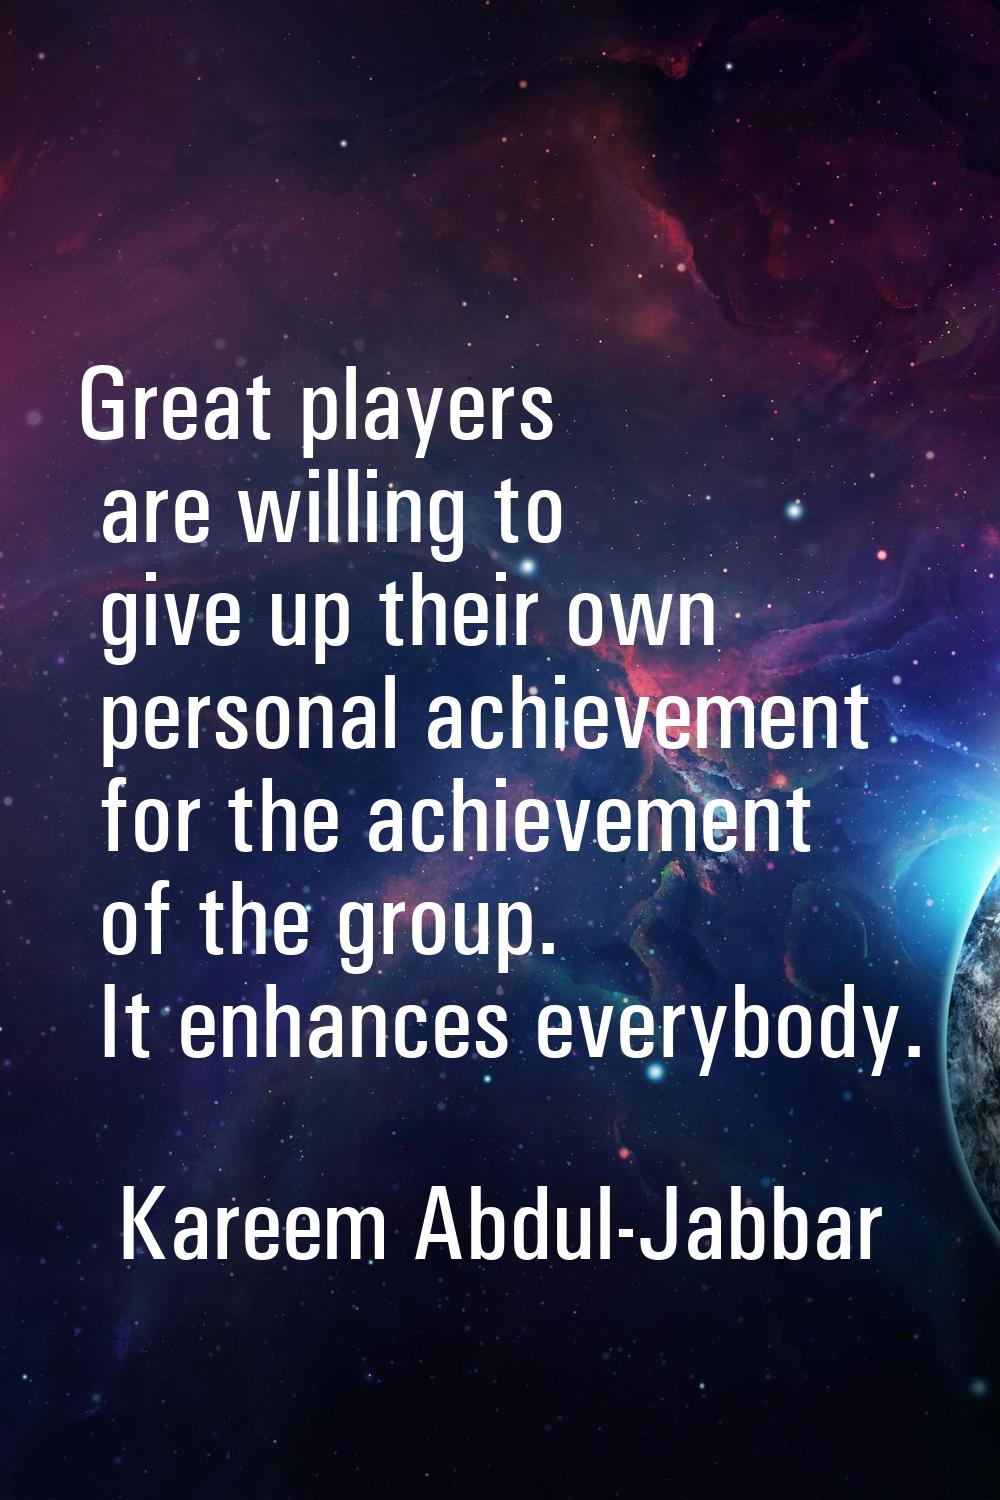 Great players are willing to give up their own personal achievement for the achievement of the grou